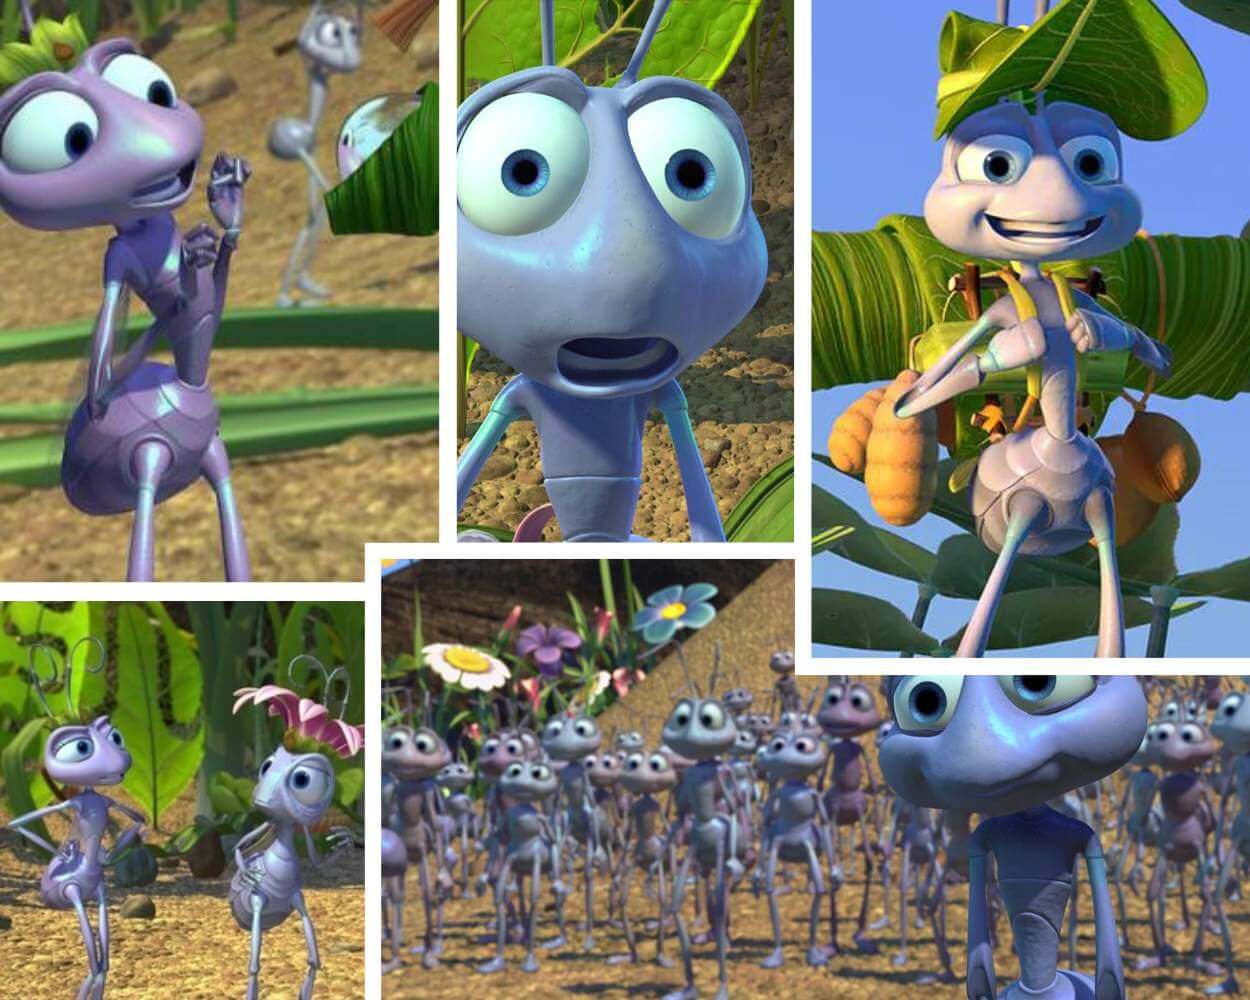 Ant characters in A Bug's Life